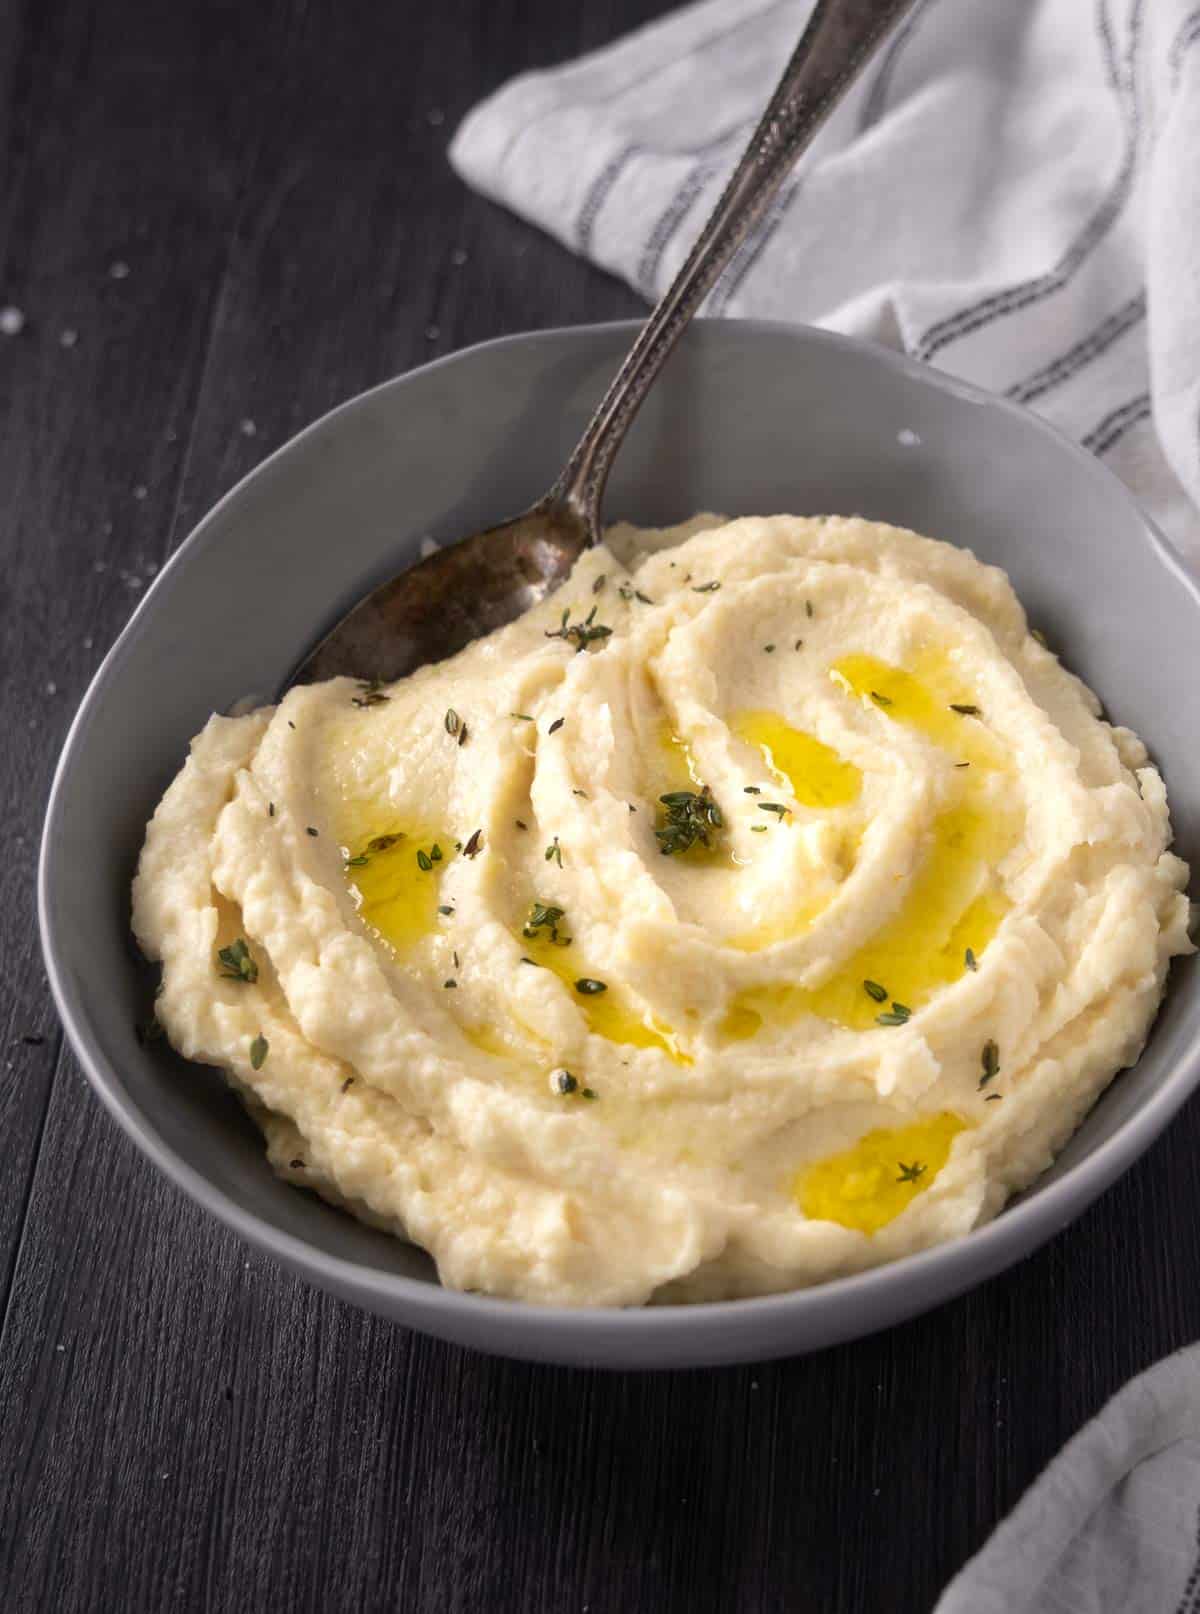 Parsnip puree in a serving bowl